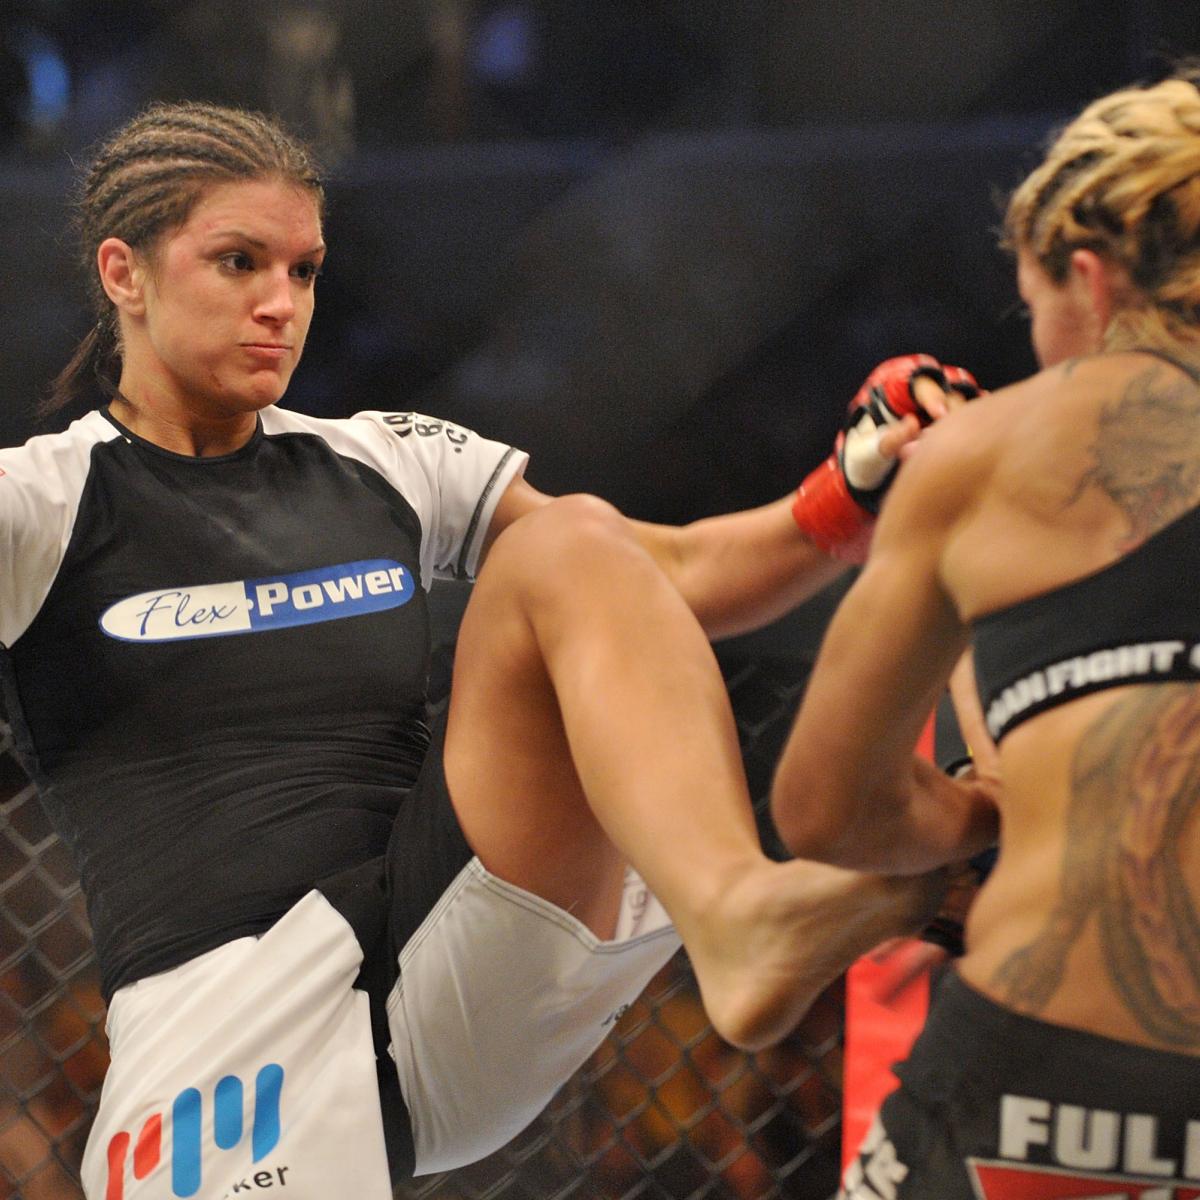 Gina Carano Still Dreams About Fighting Meeting Dana White Next Week